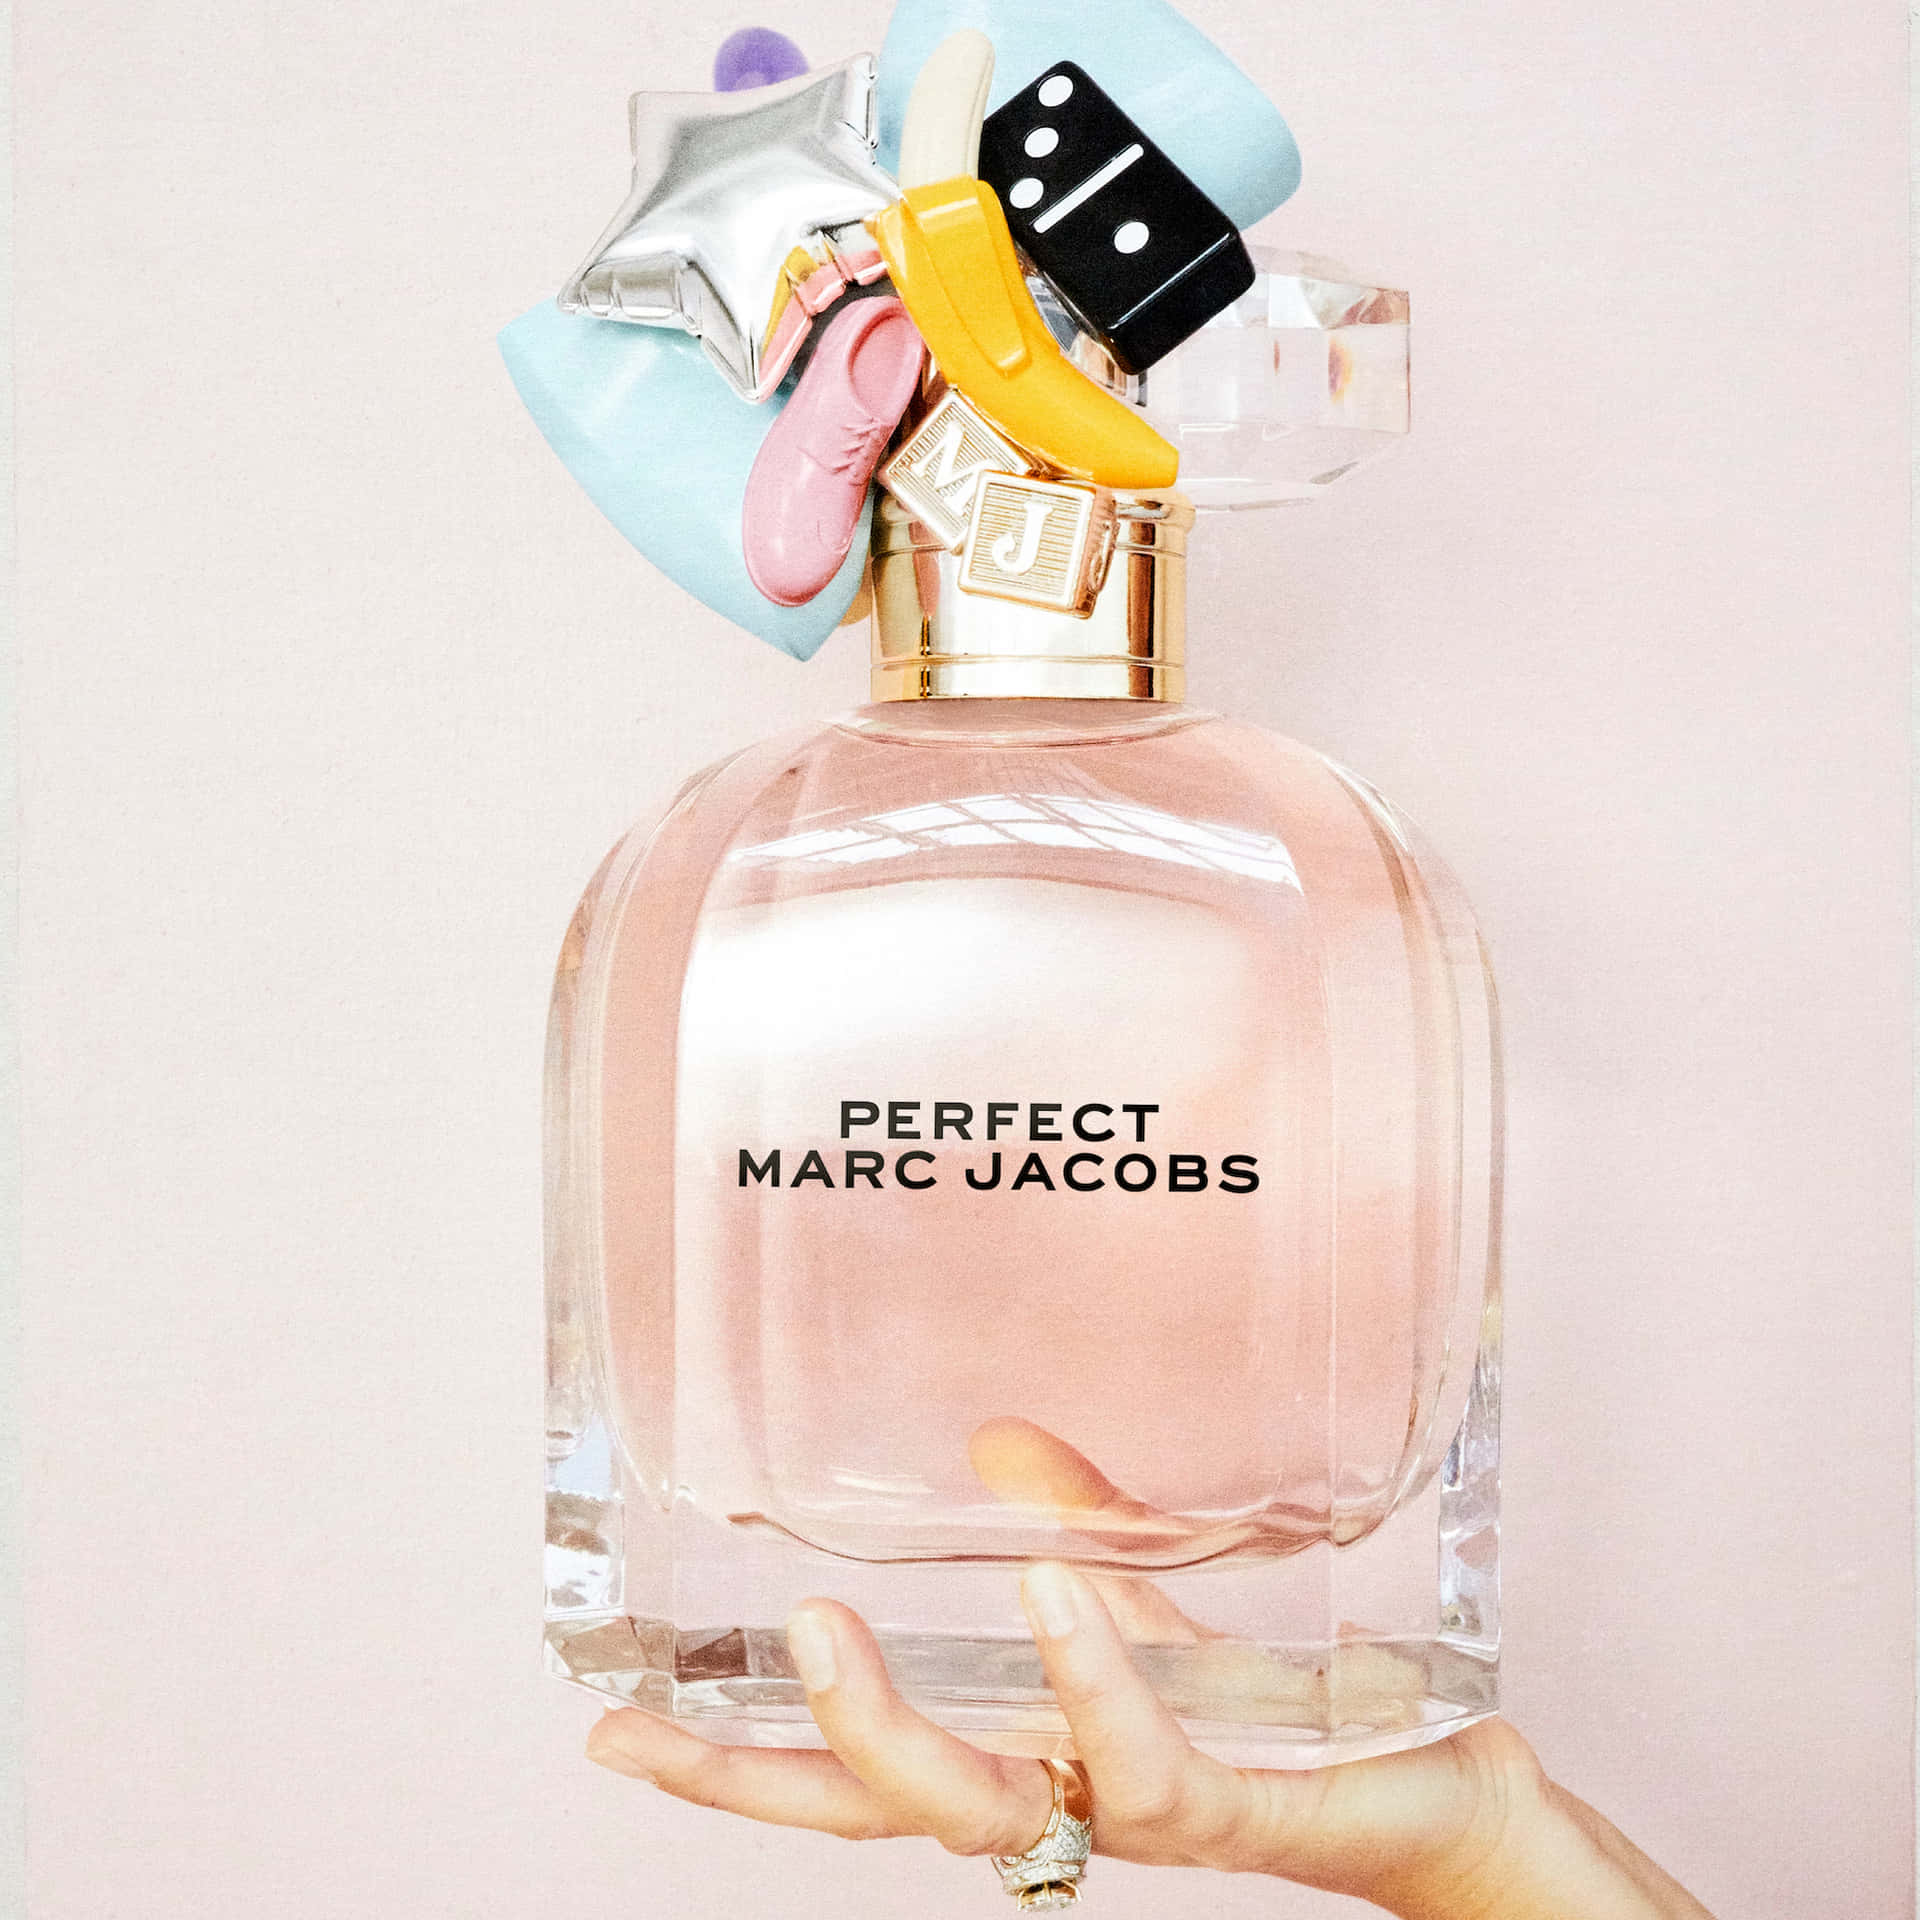 Marc Jacobs Perfect Perfume - Ad